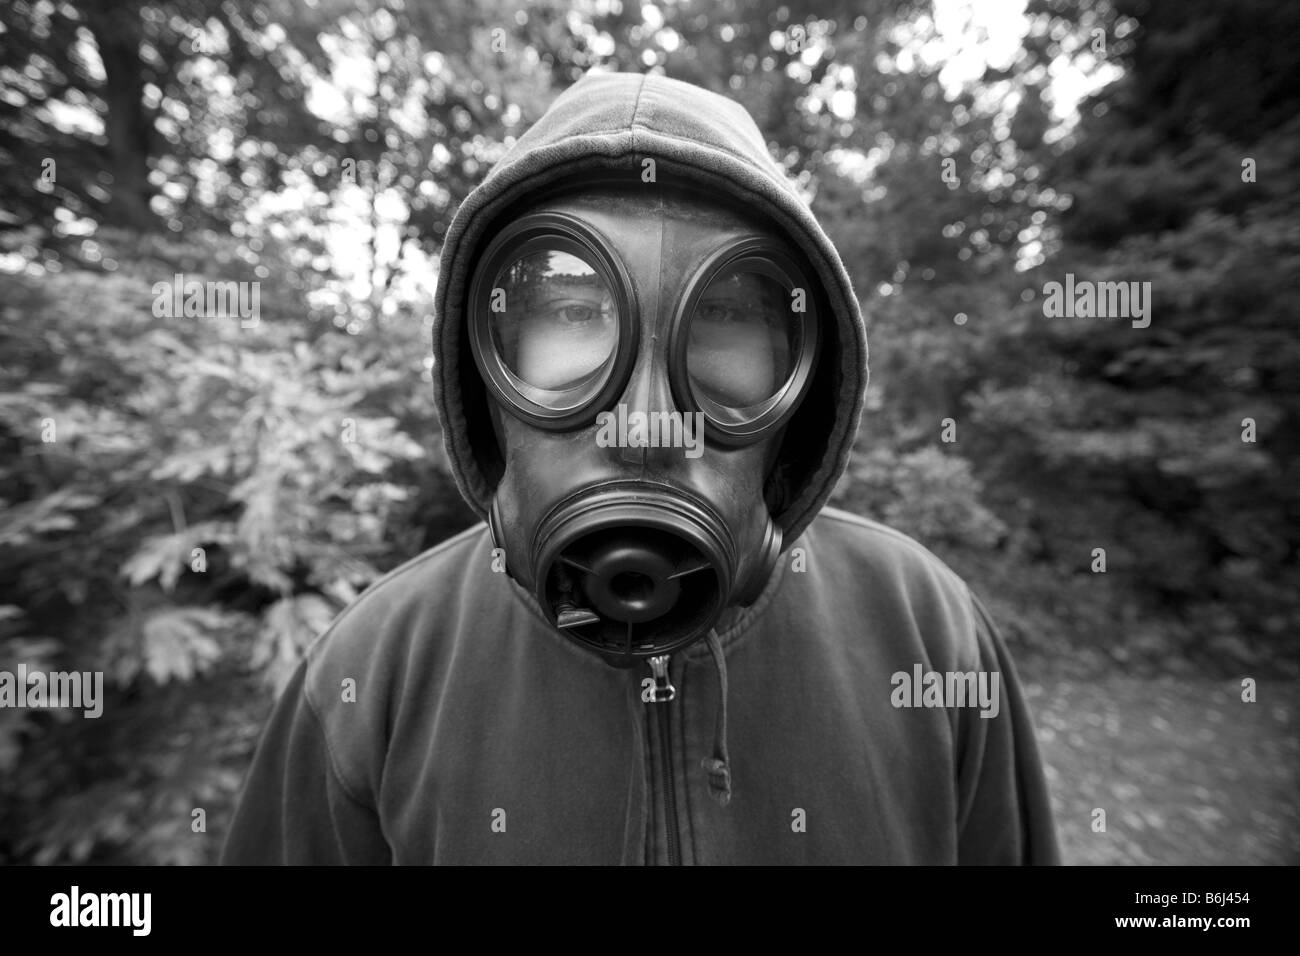 black and white shots with gas mask Stock Photo